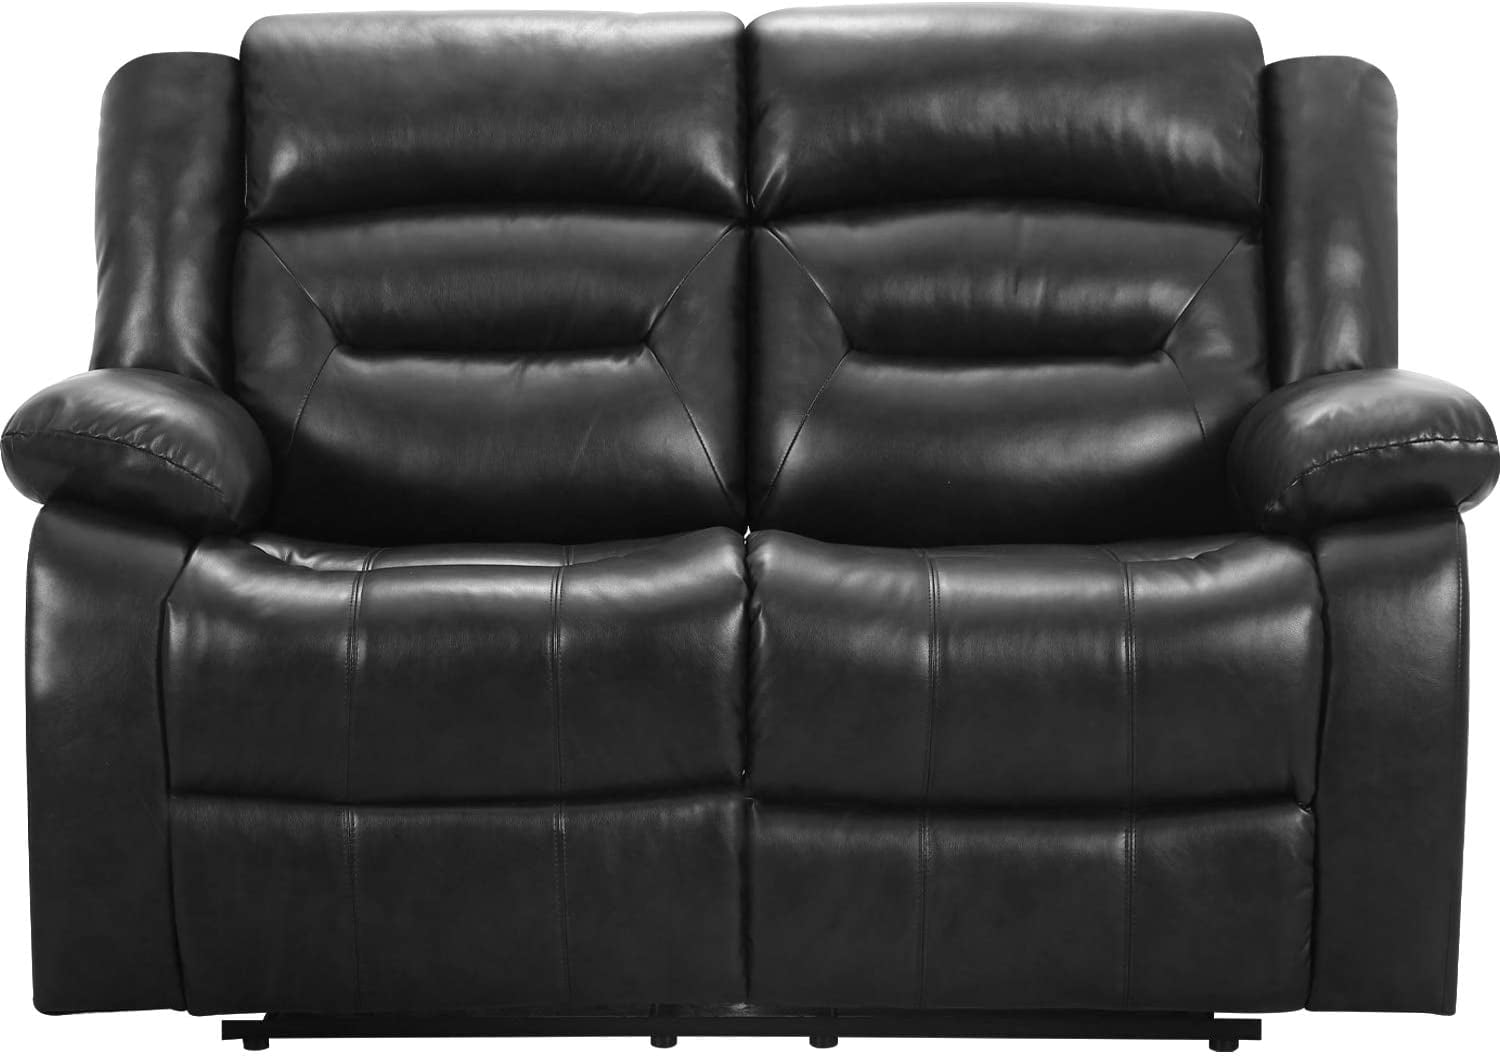 Recliner Sofa Love Seat Reclining Couch Leather Loveseat Home Theater Seating 